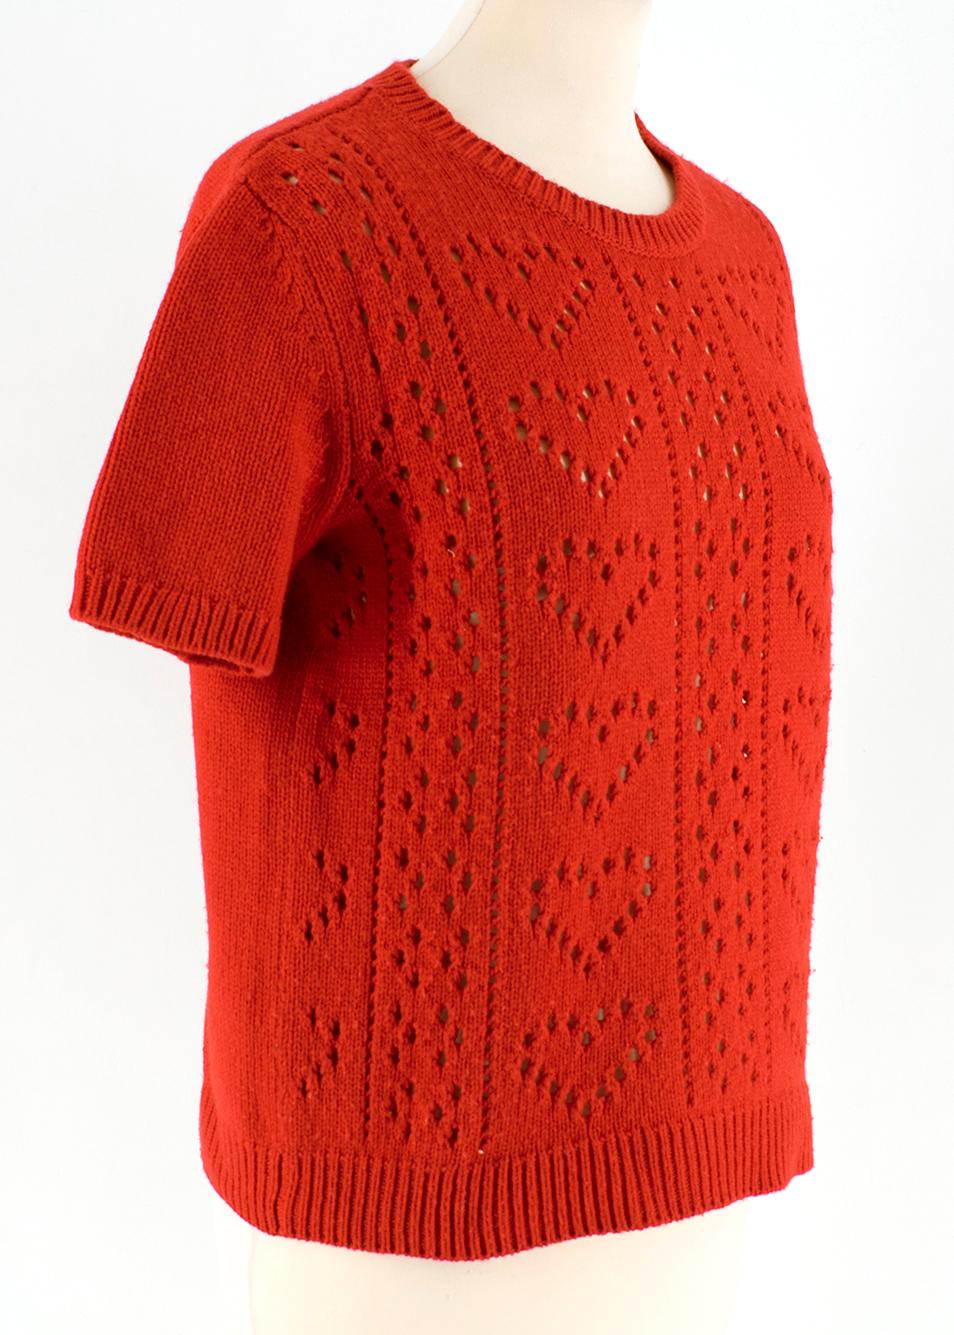 Miu Miu Red Wool blend Heart Sweater

- red wool blend sweater
- knit cutouts in heart shape
- short sleeve
- unlined
- pull on 

Please note, these items are pre-owned and may show some signs of storage, even when unworn and unused. This is